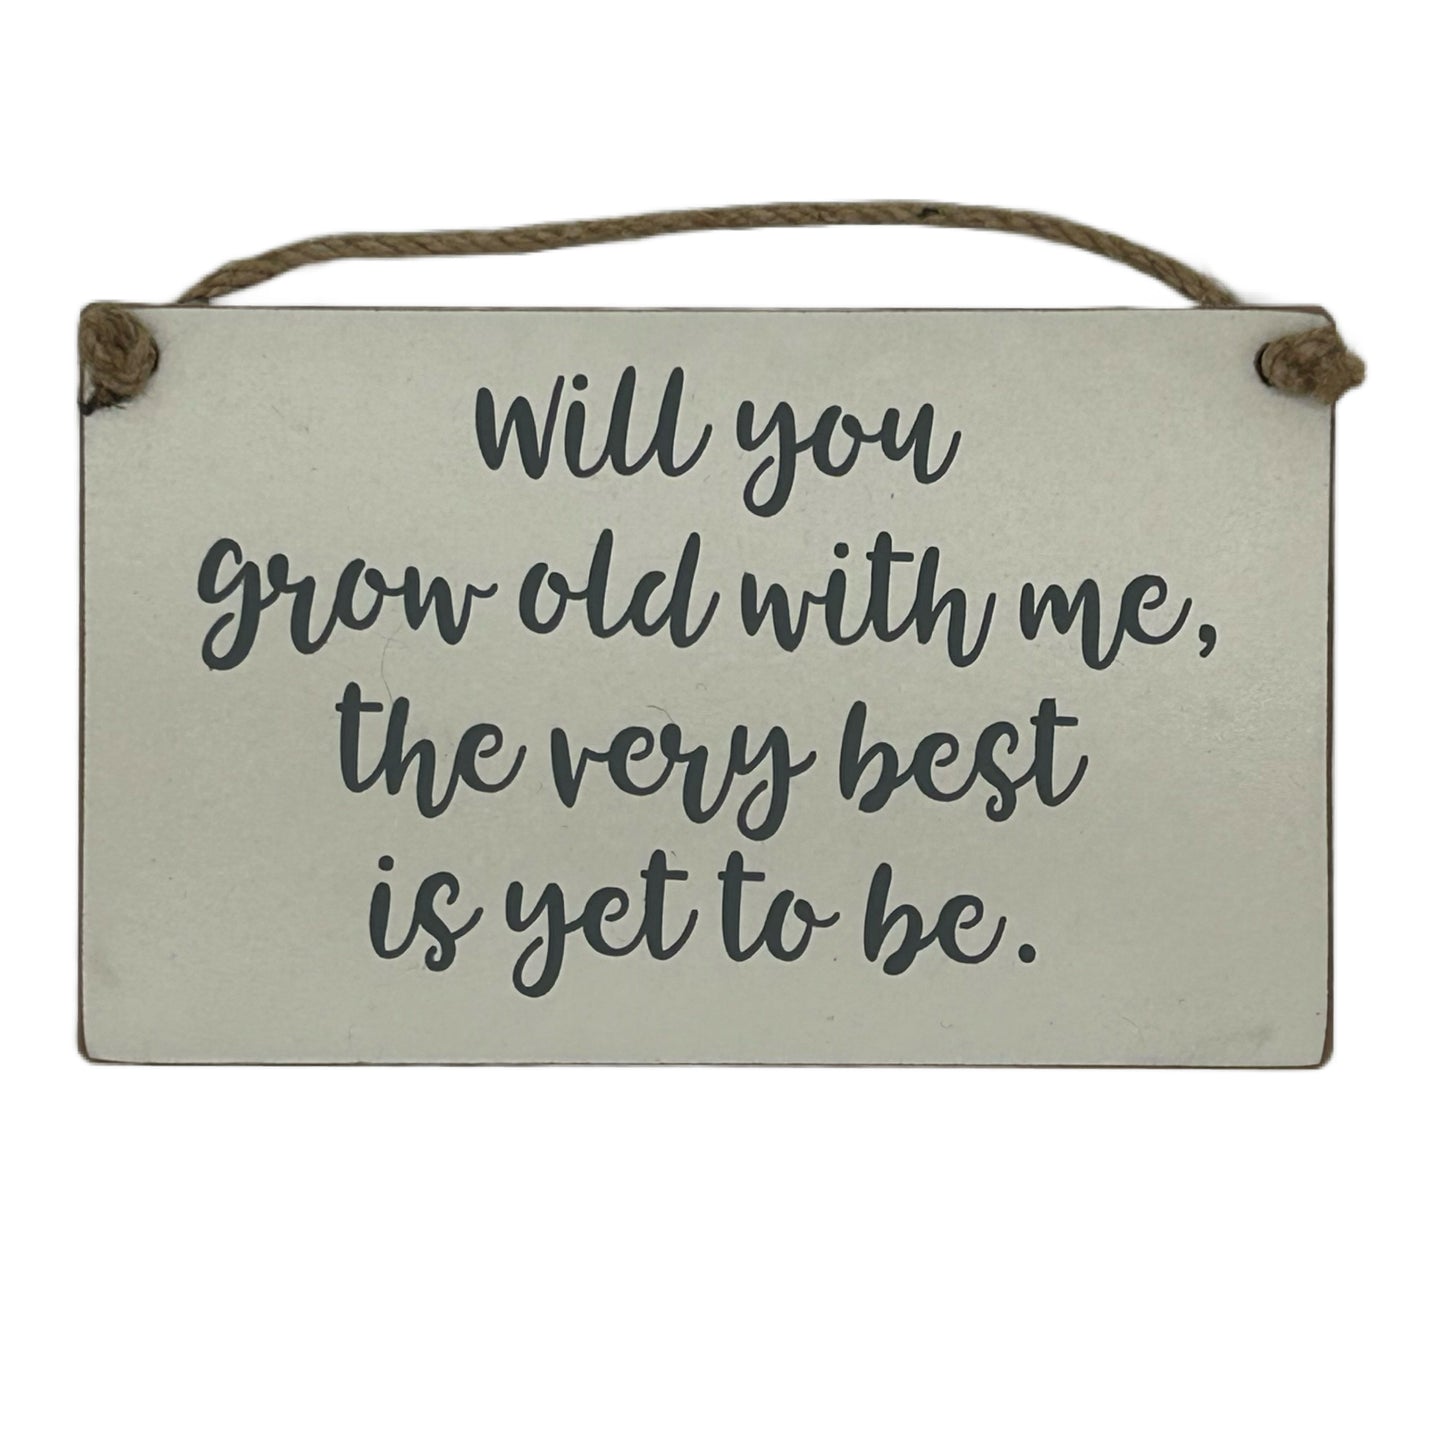 Will you grow old with me, the very best is yet to be.